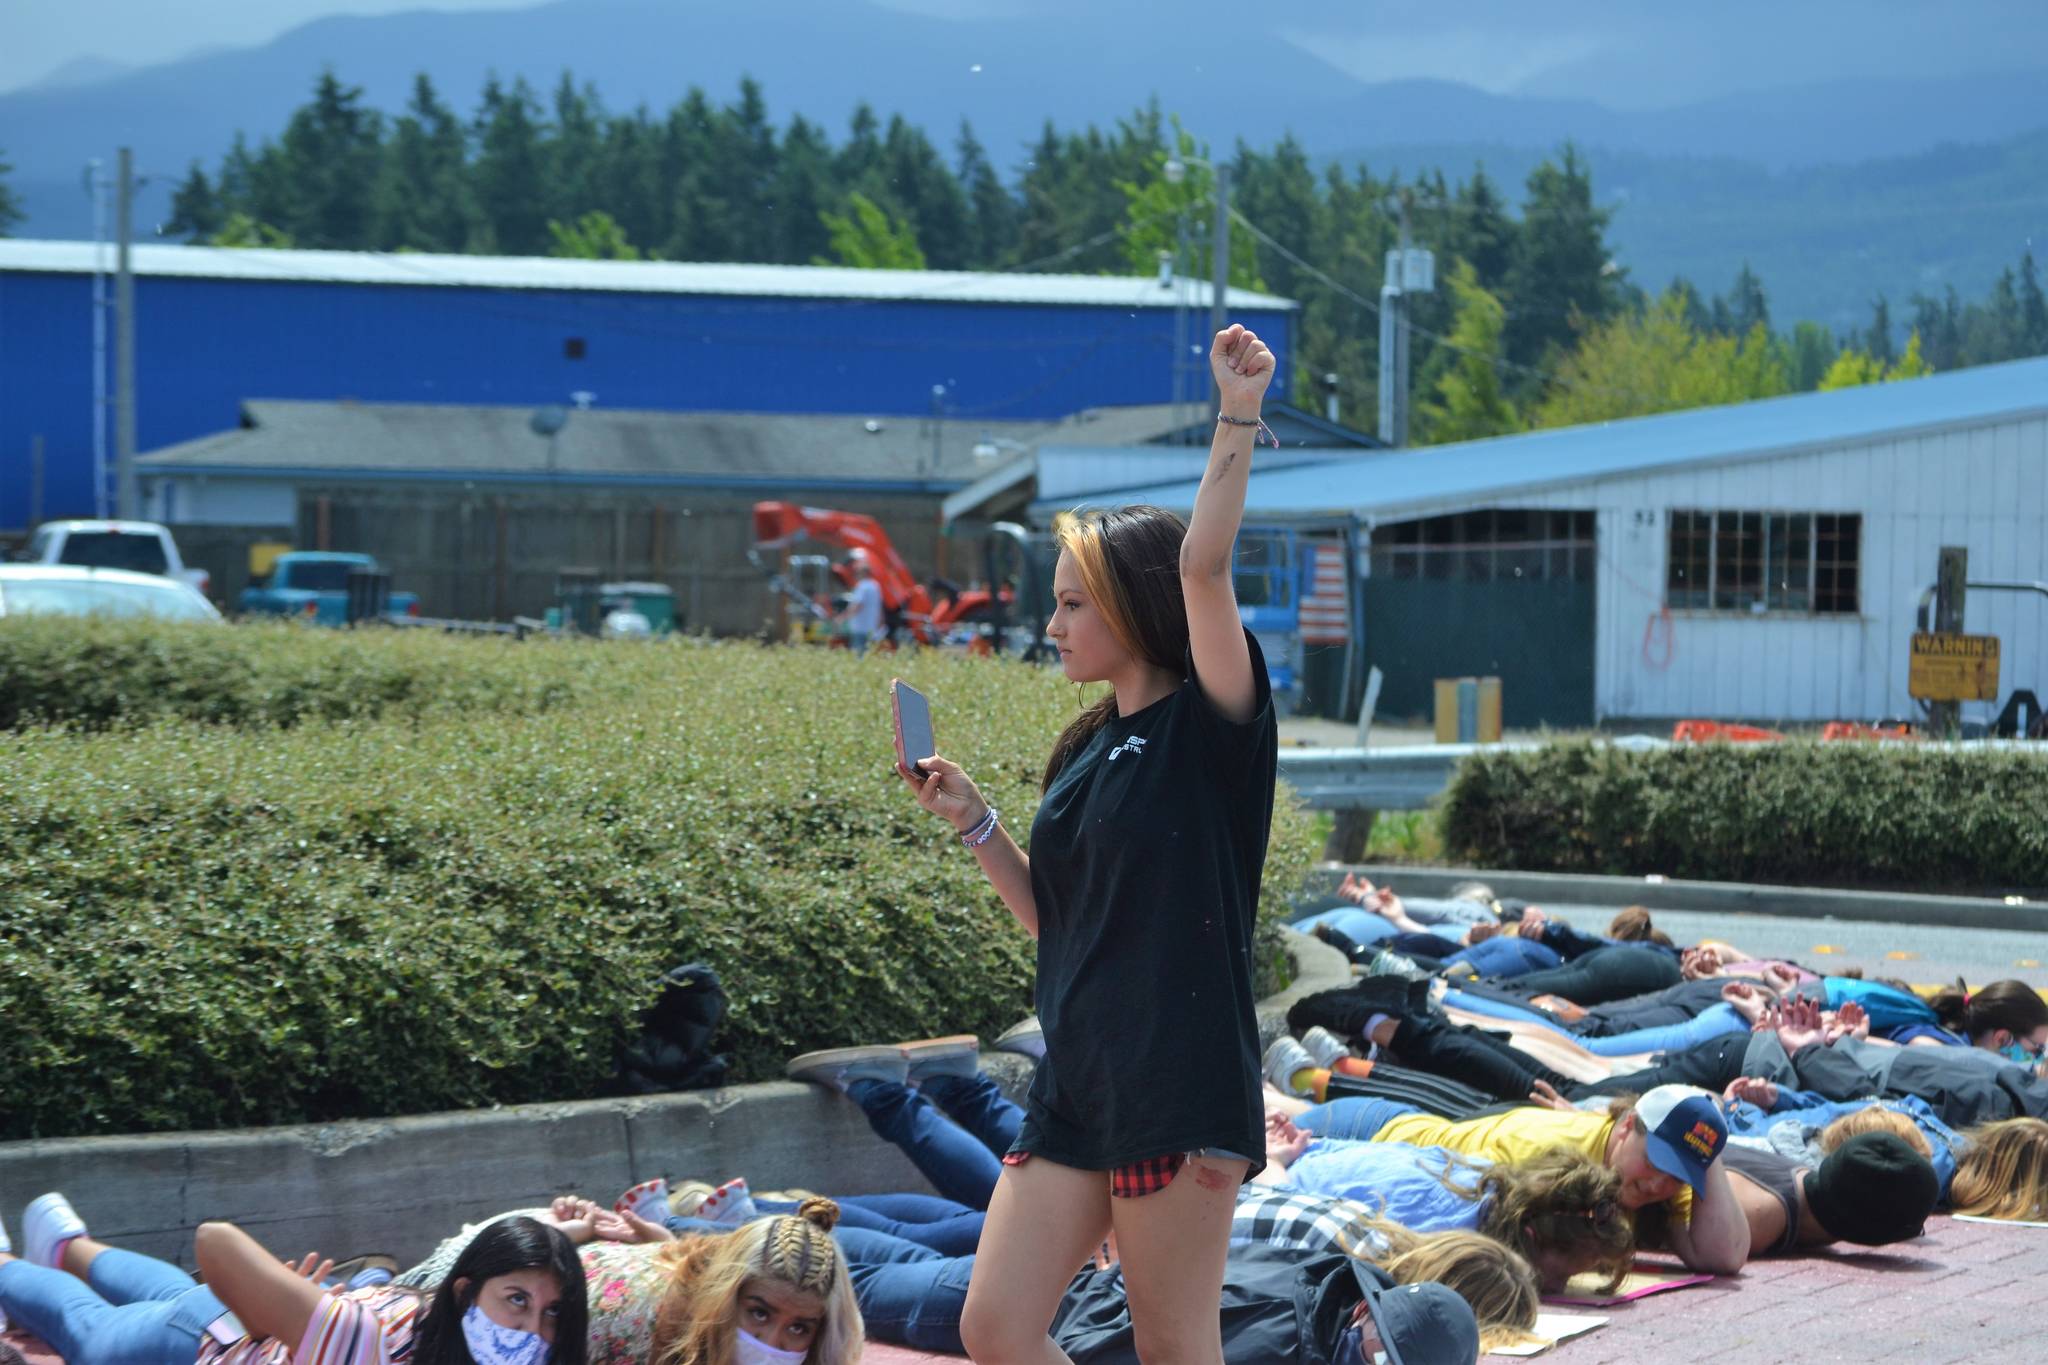 Nia Haley of Sequim videos demonstrators on June 4 at the circle the River Road roundabout in support of the Black Lives Matter movement. They laid on the ground for 8 minutes and 46 seconds to honor the memory of George Floyd and oppose police brutality. Sequim Gazette photo by Matthew Nash